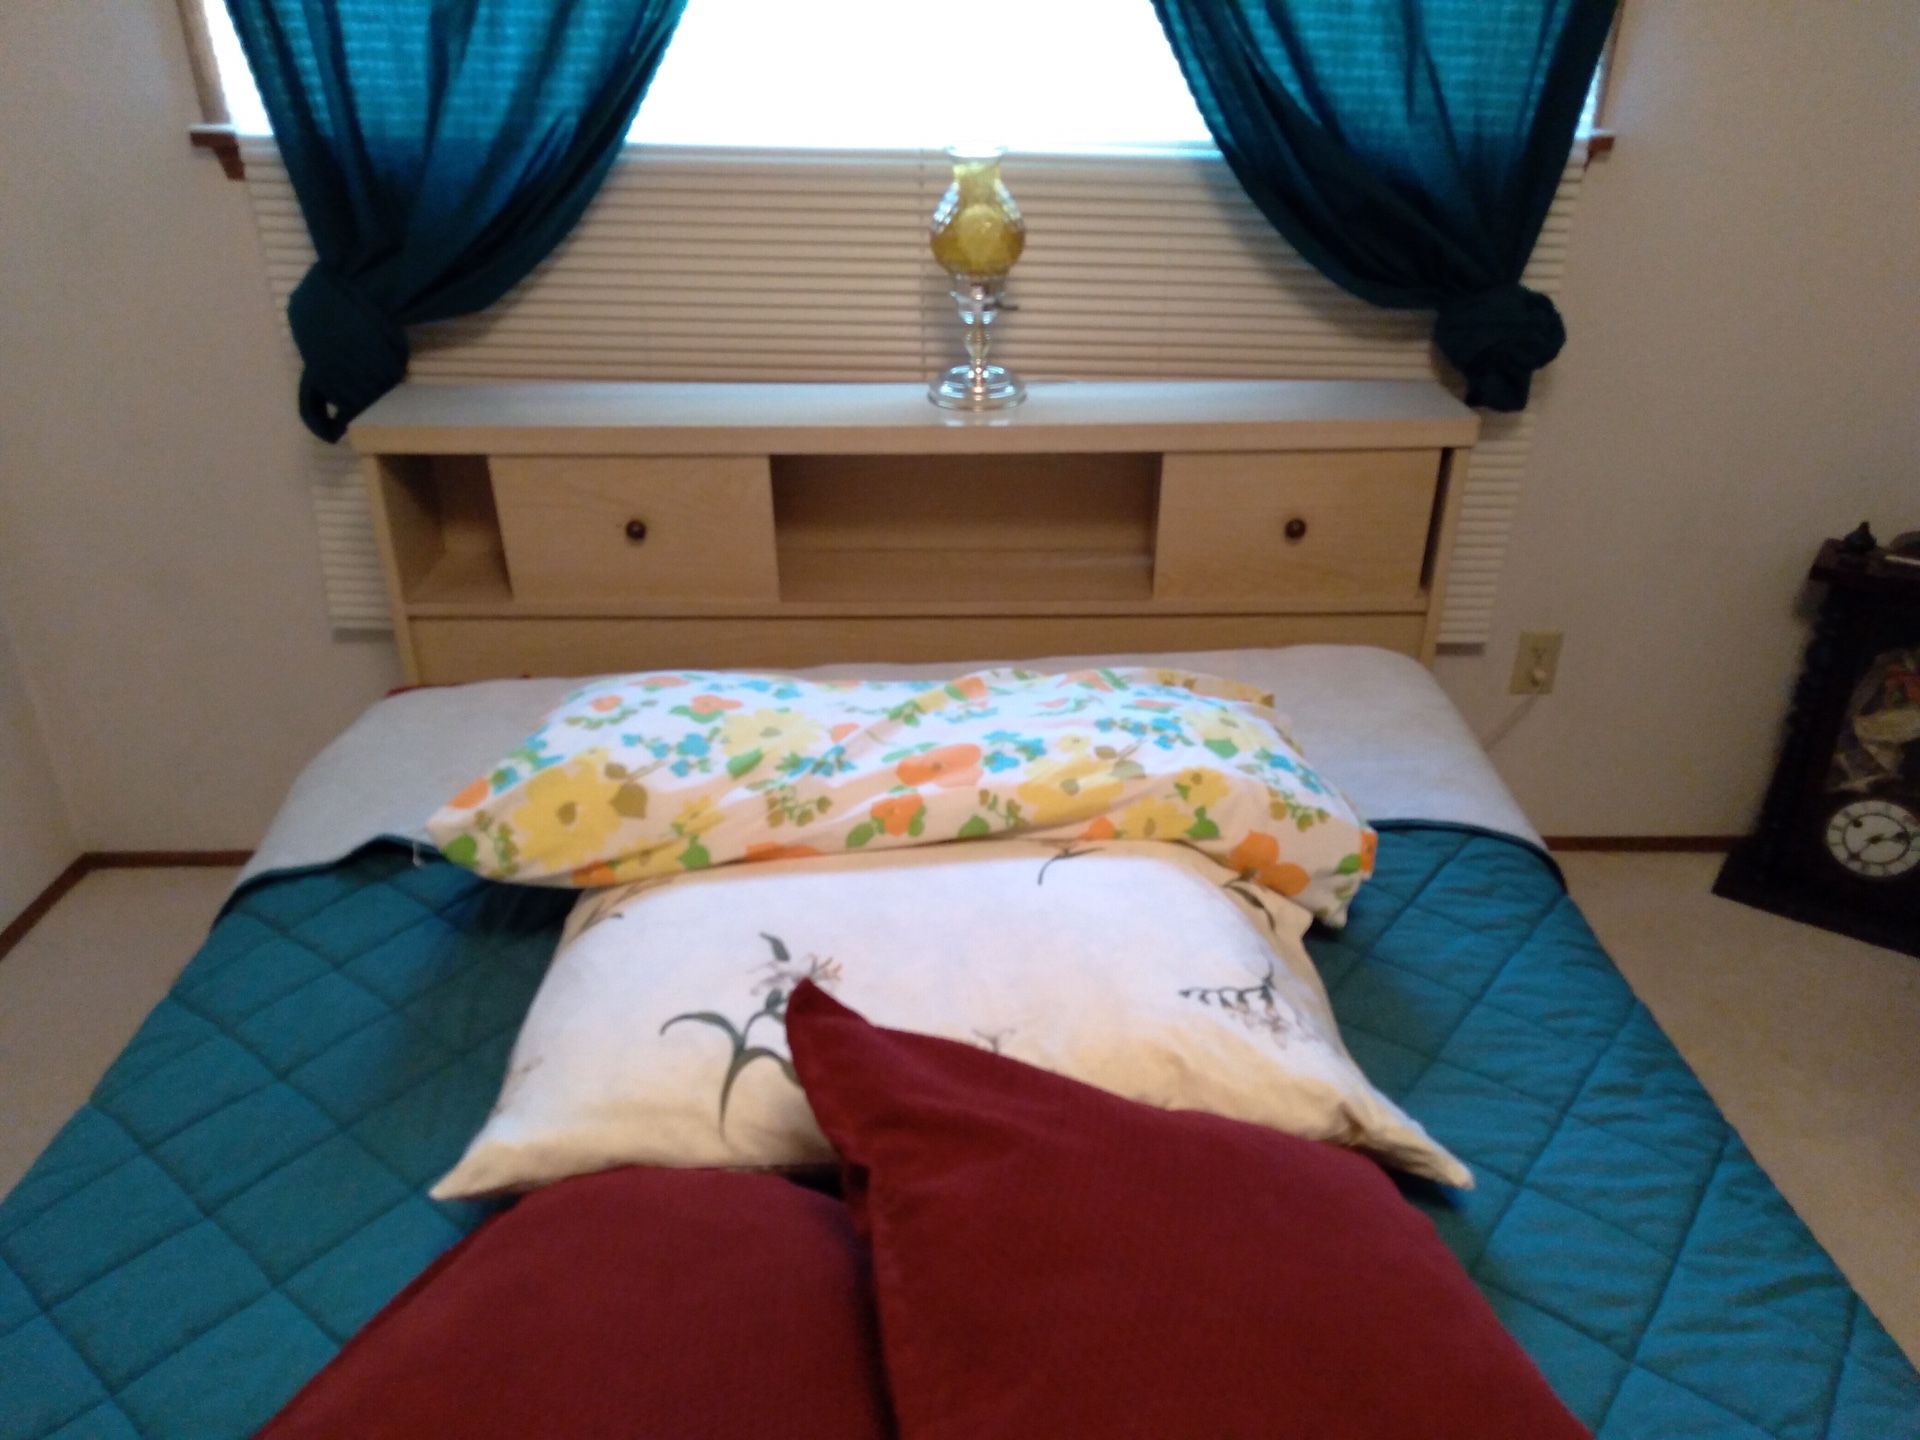 3-PIECE BEDROOM SET WITH MIRROR, HEADBOARD, MATTRESS AND BOX SPRINGS...DELIVERY AVAILABLE POSSIBLY